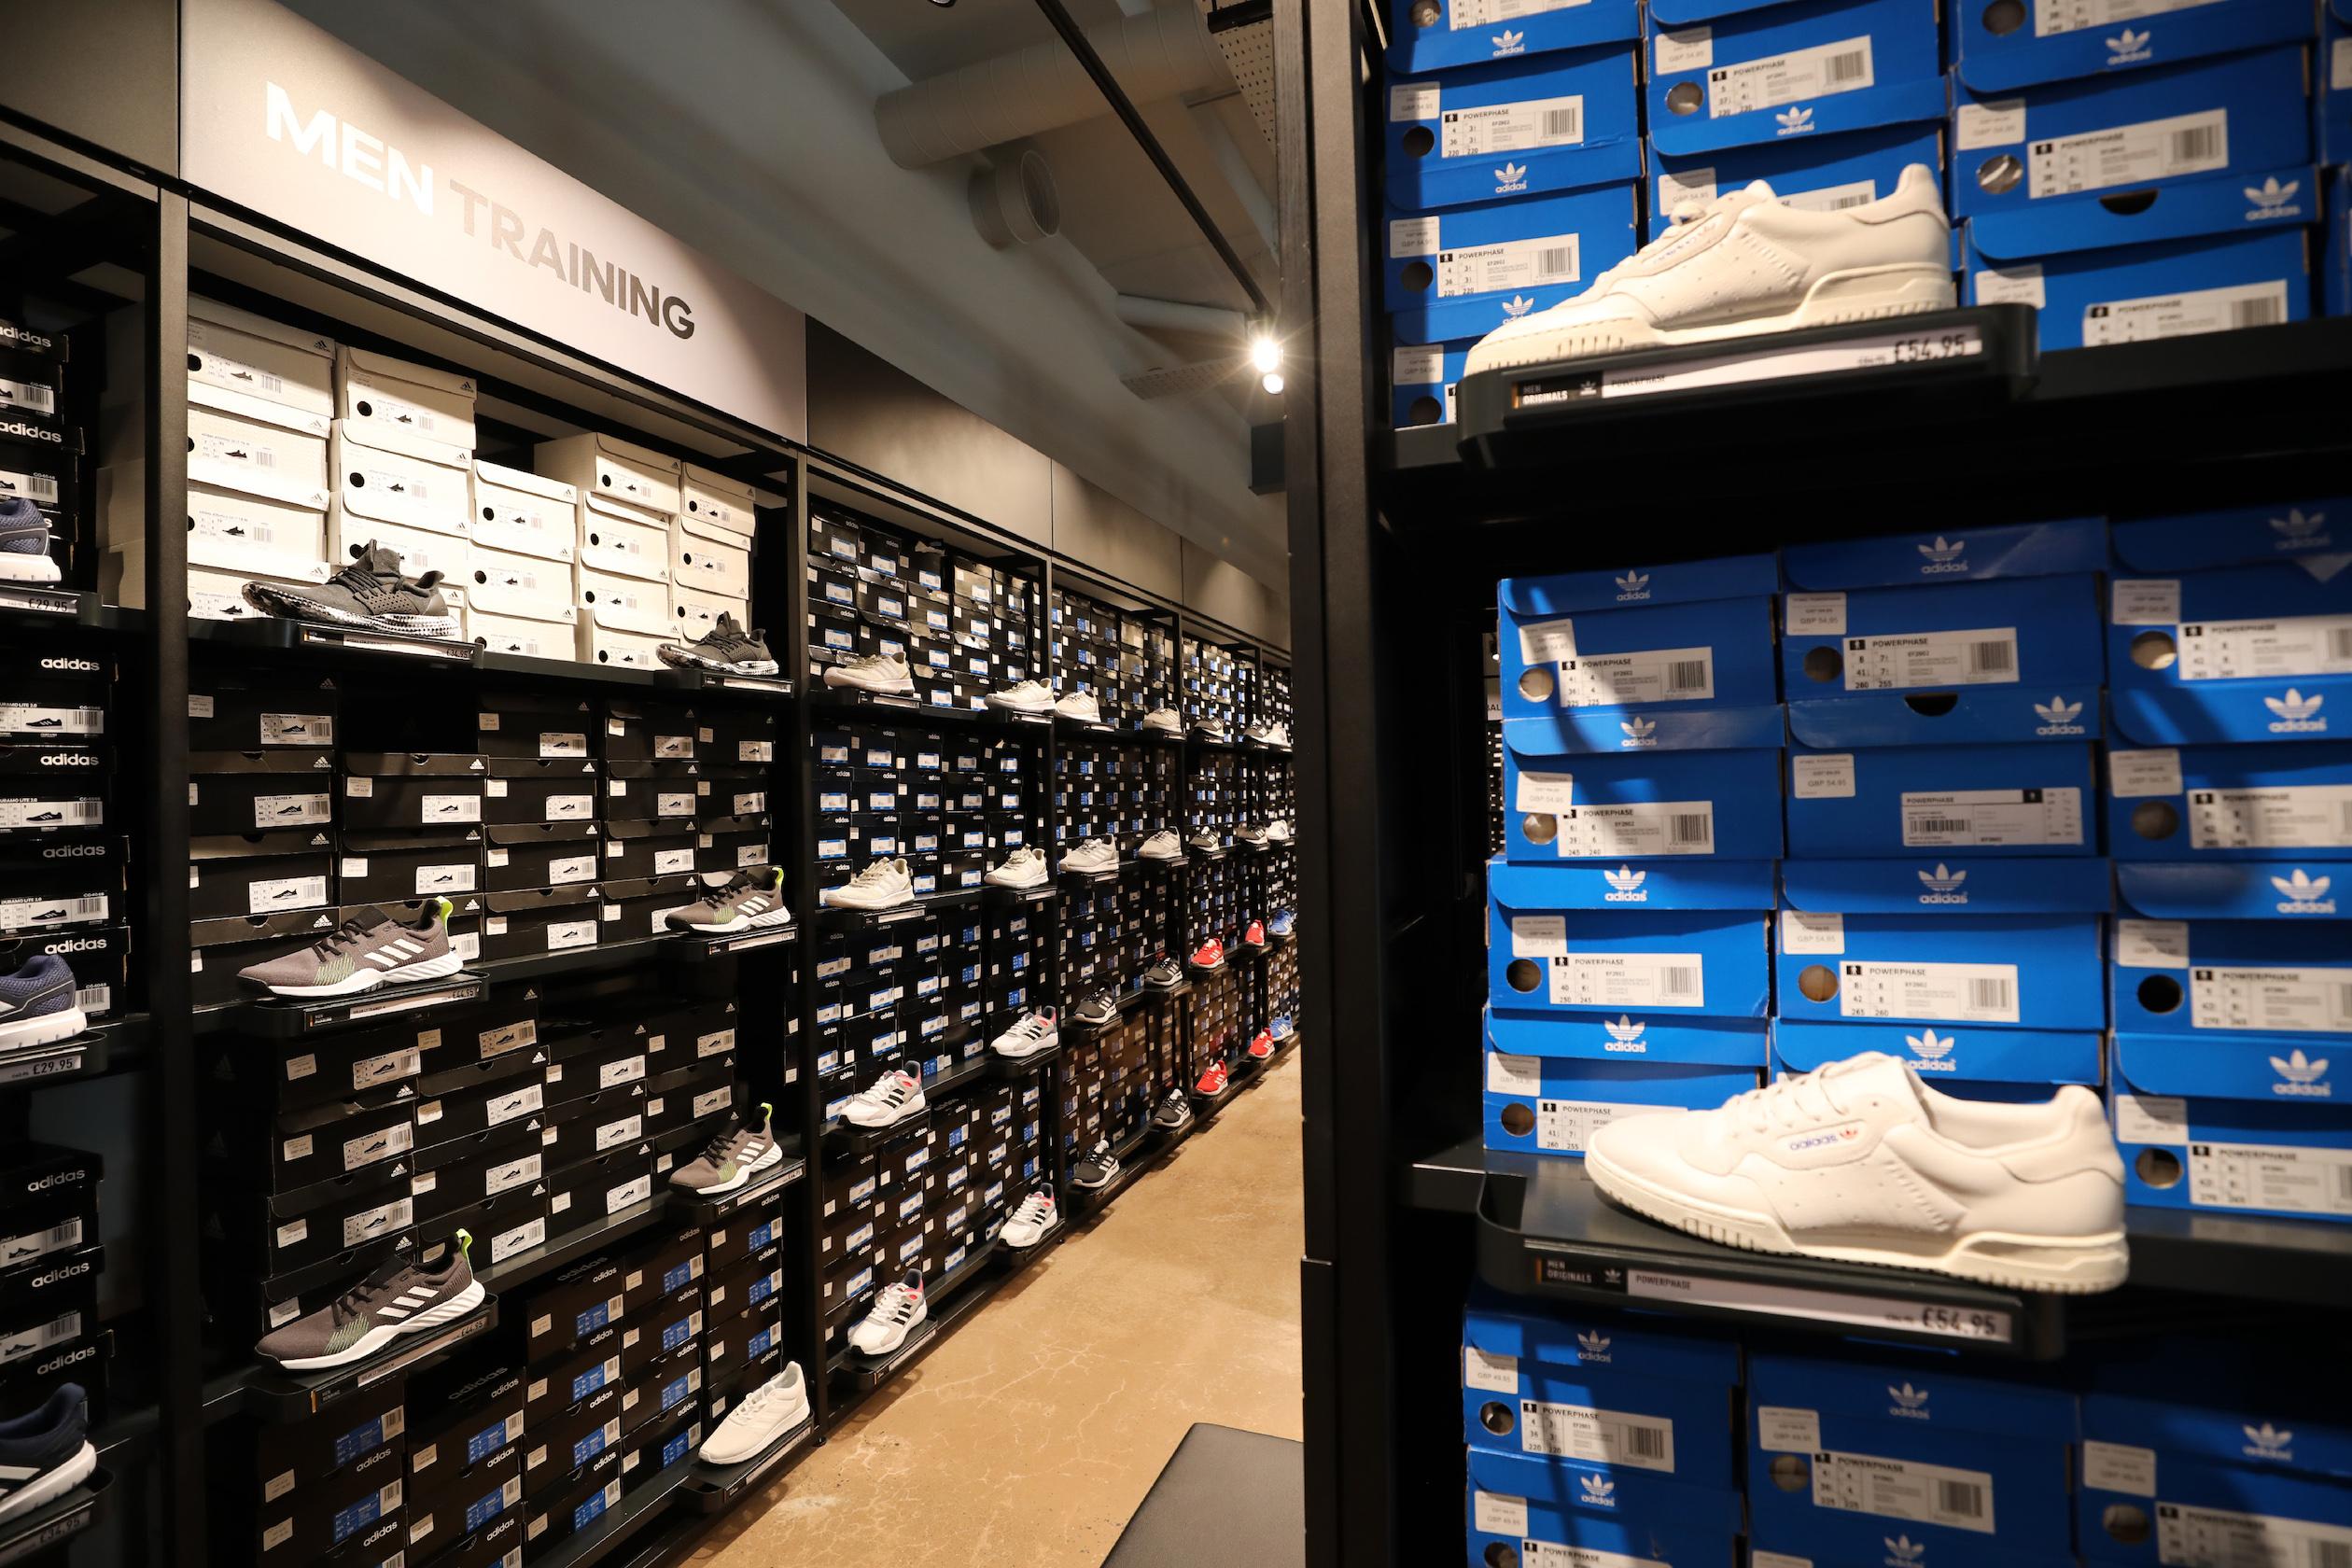 adidas outlet store uk